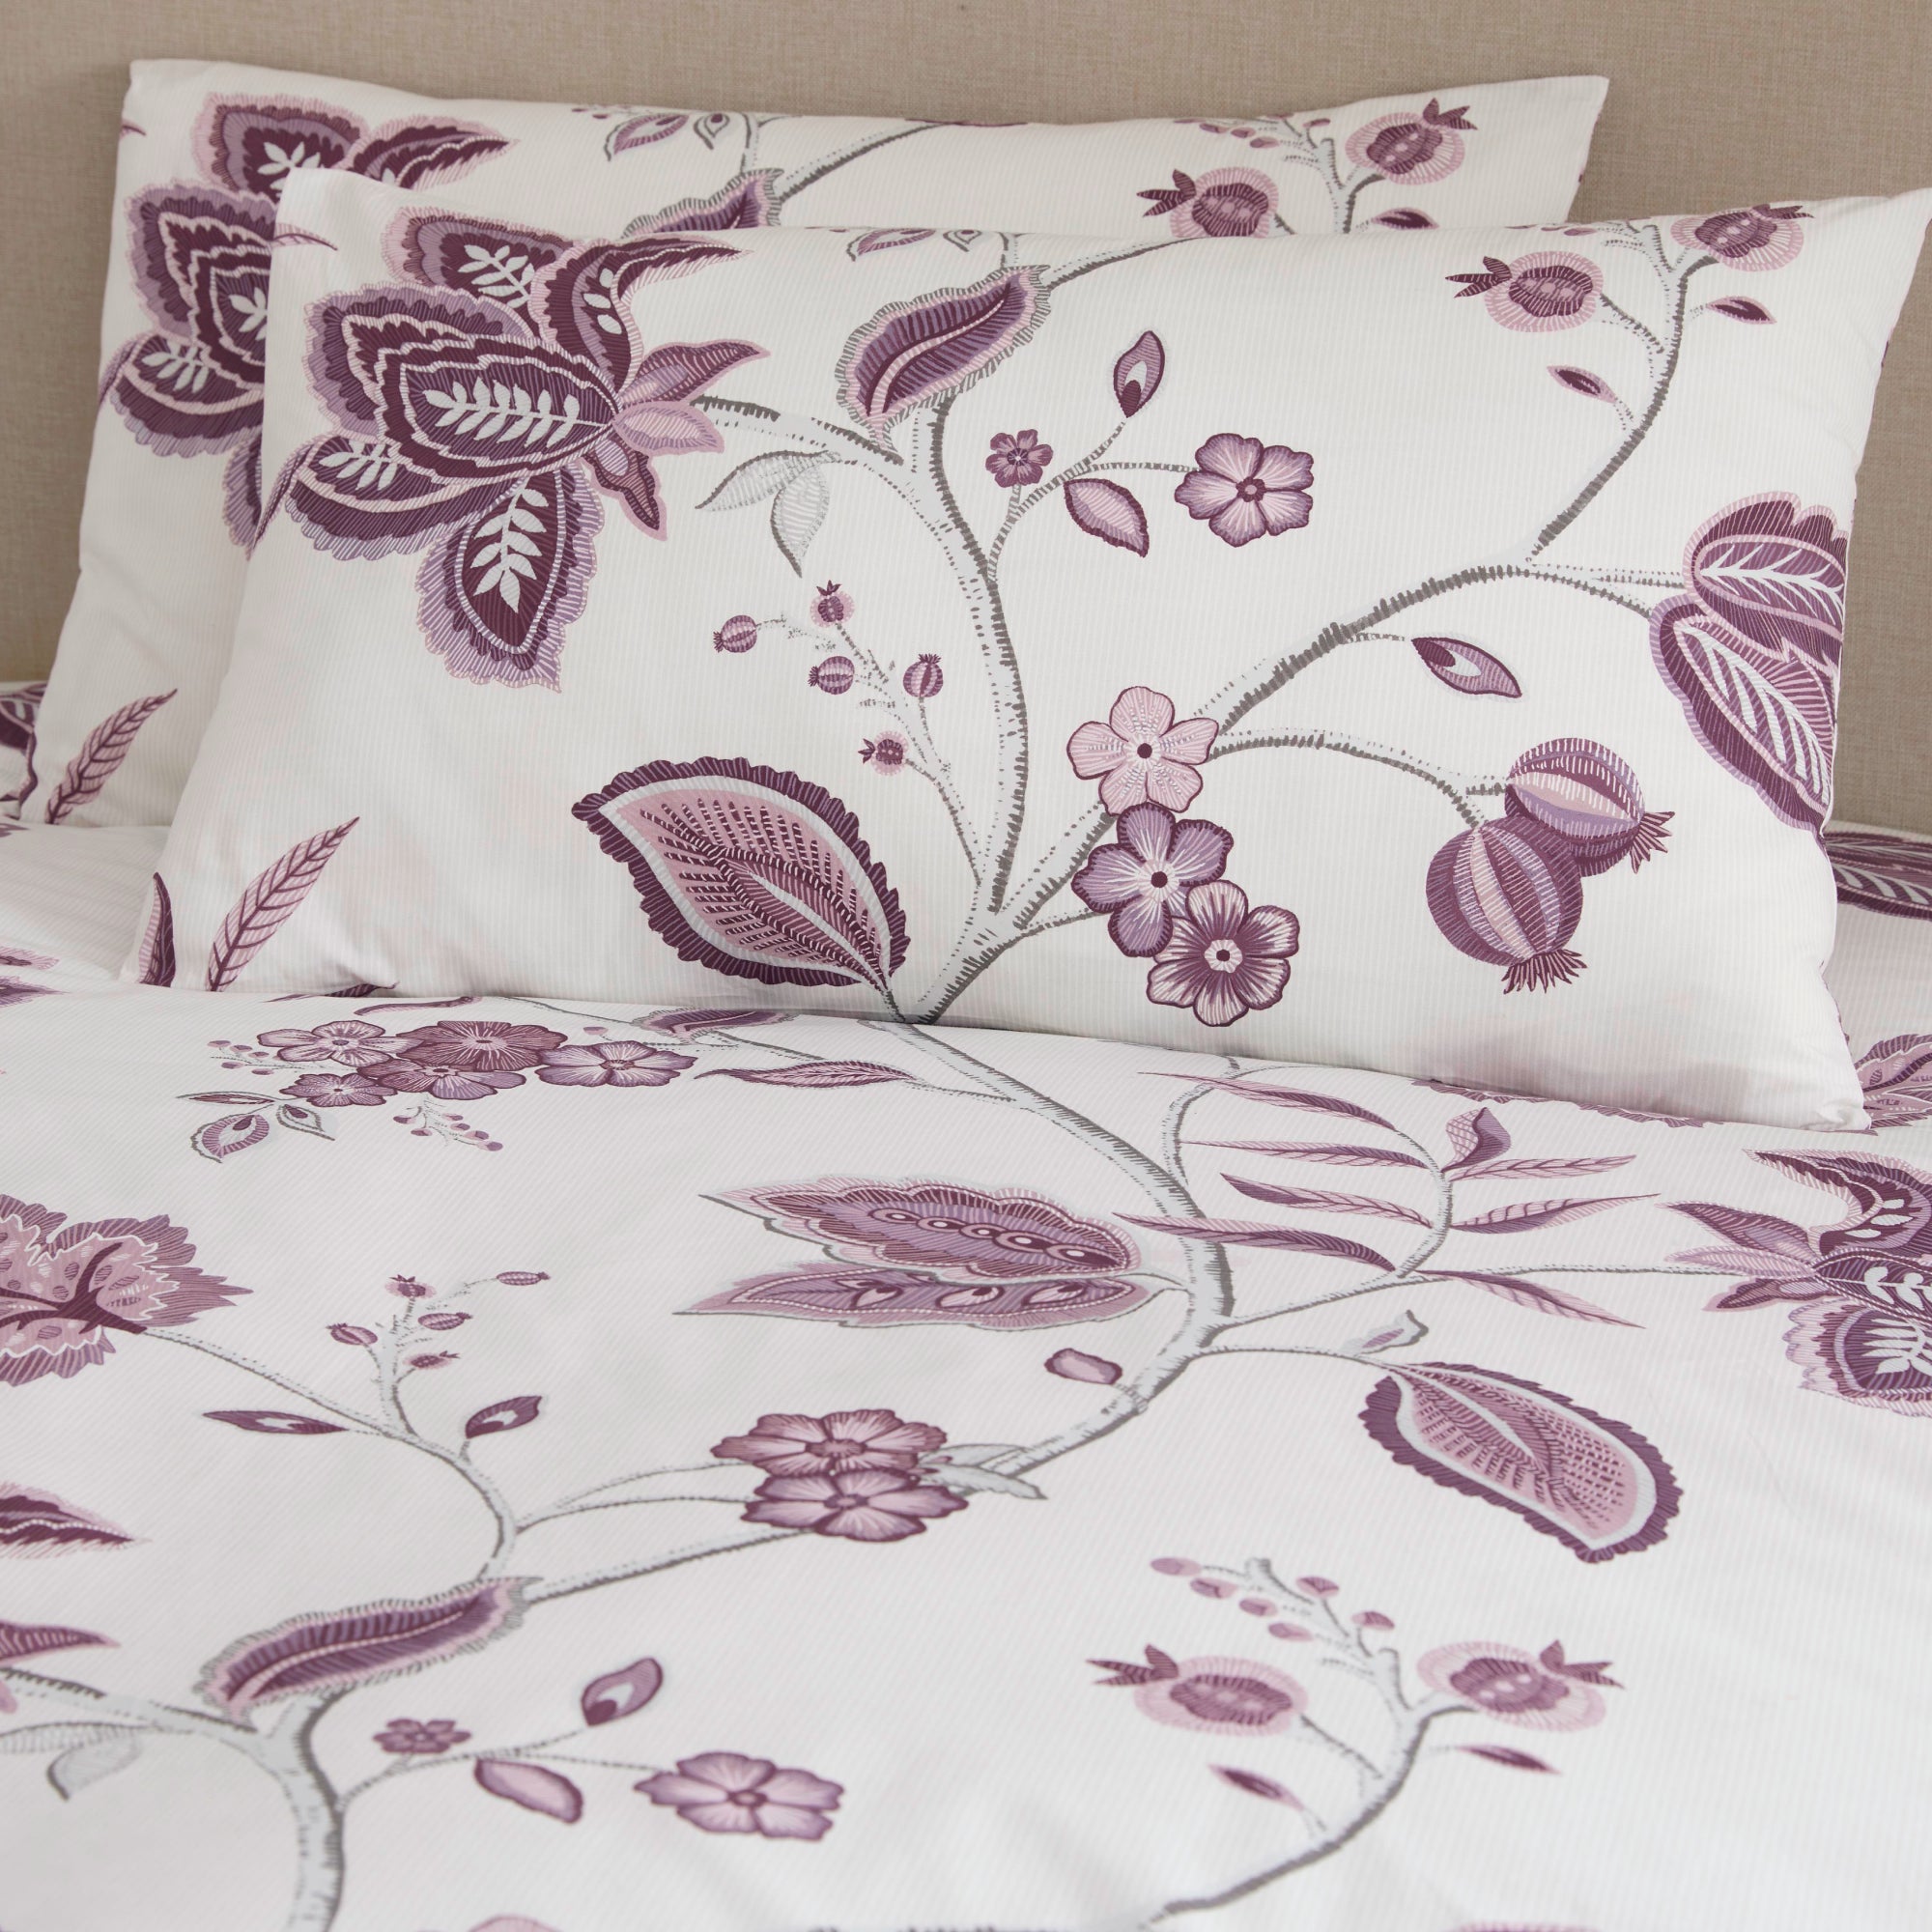 Duvet Cover Set Samira by Dreams And Drapes Design in Plum